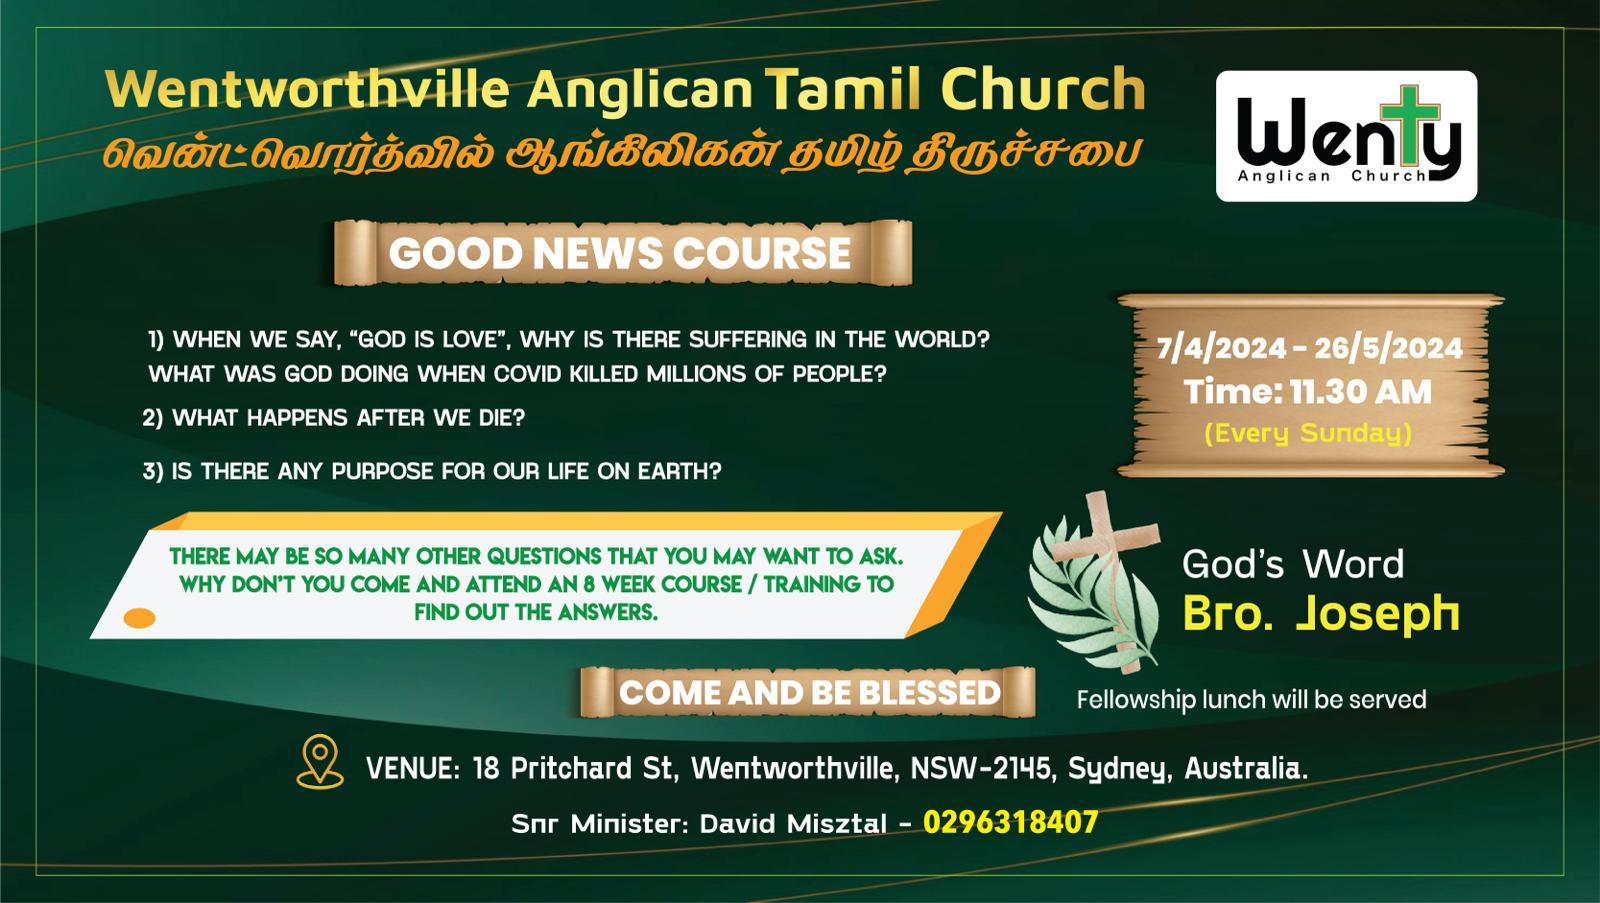 Wentworthville Anglican Tamil Church. Good News Course. Sundays 11.30am. God's Word: Bro. Joseph. Come and be blessed. Fellowship lunch will be served.